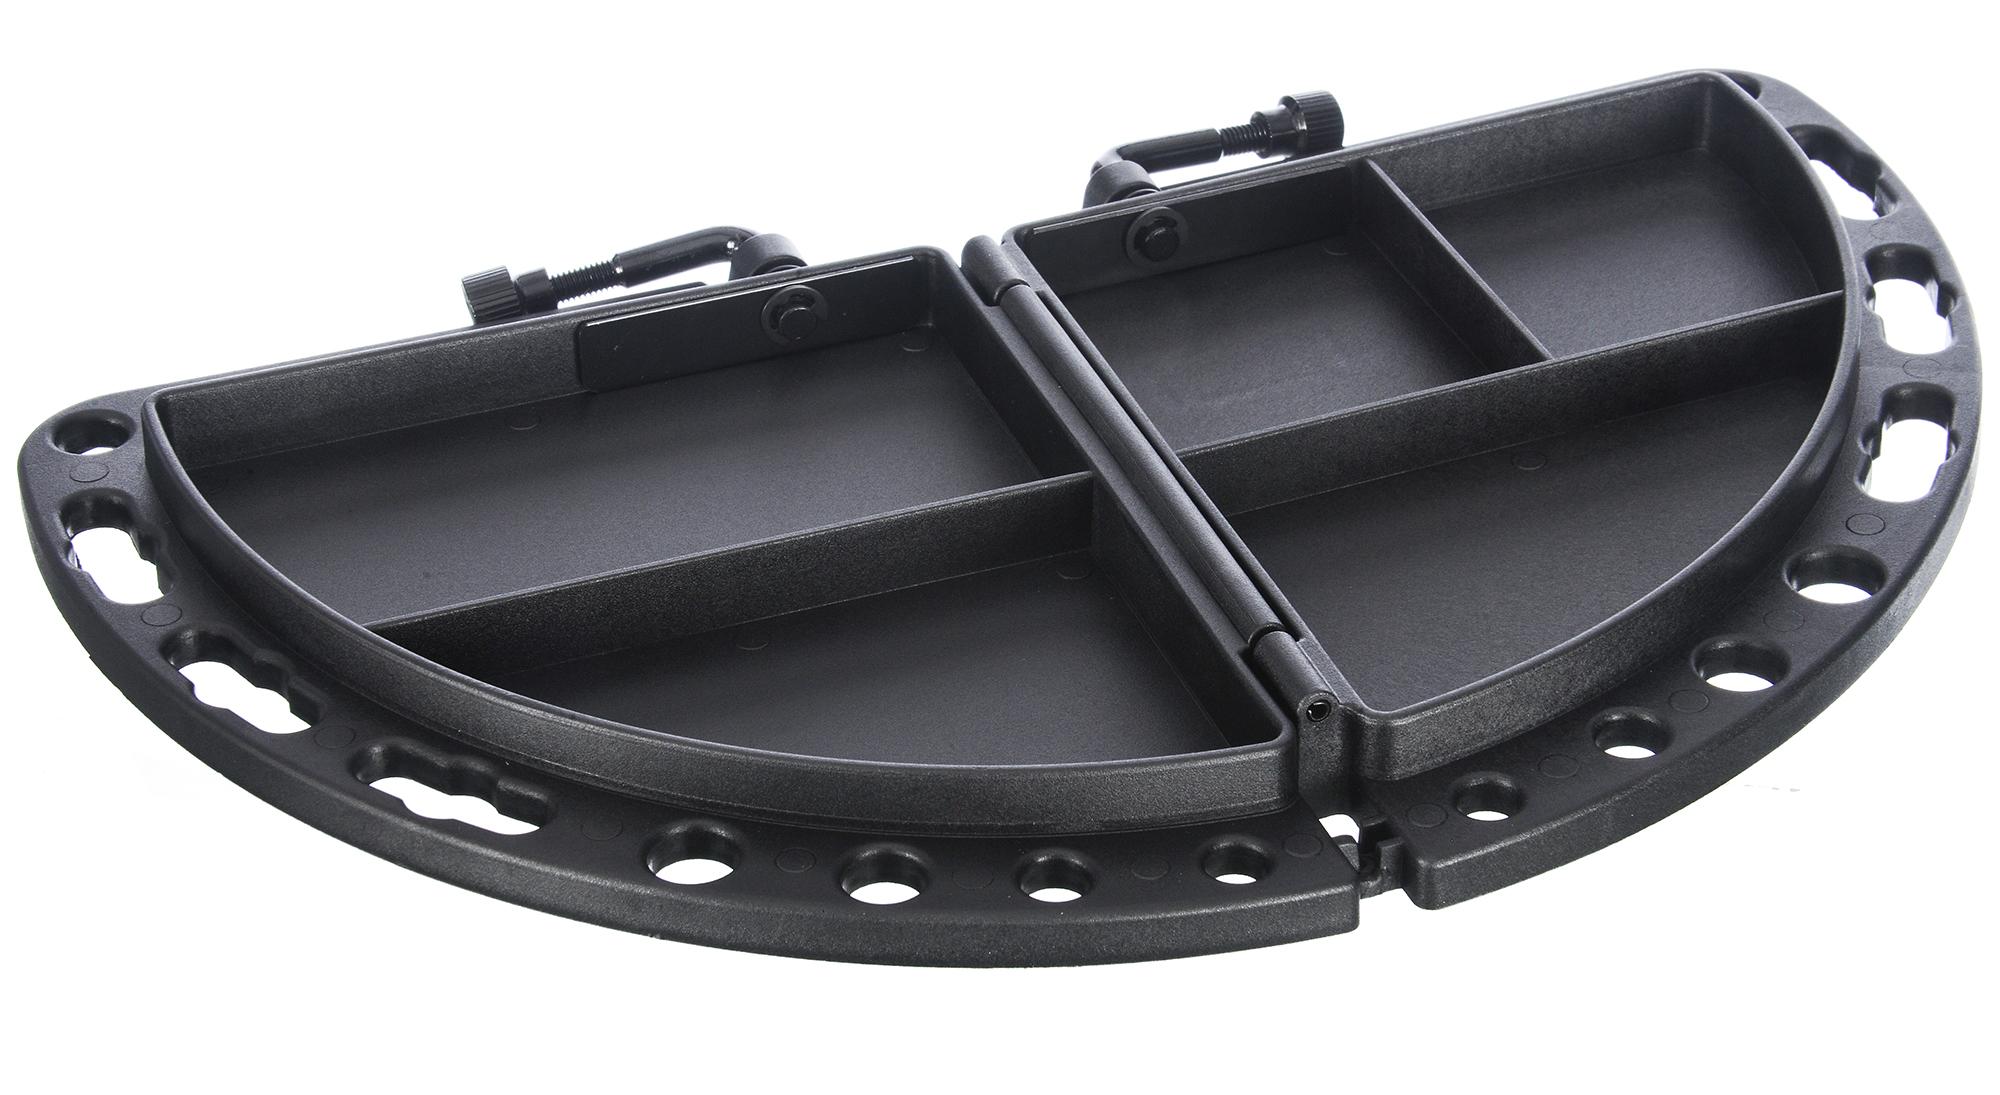 Lifeline Tool Tray For Workstand  Black